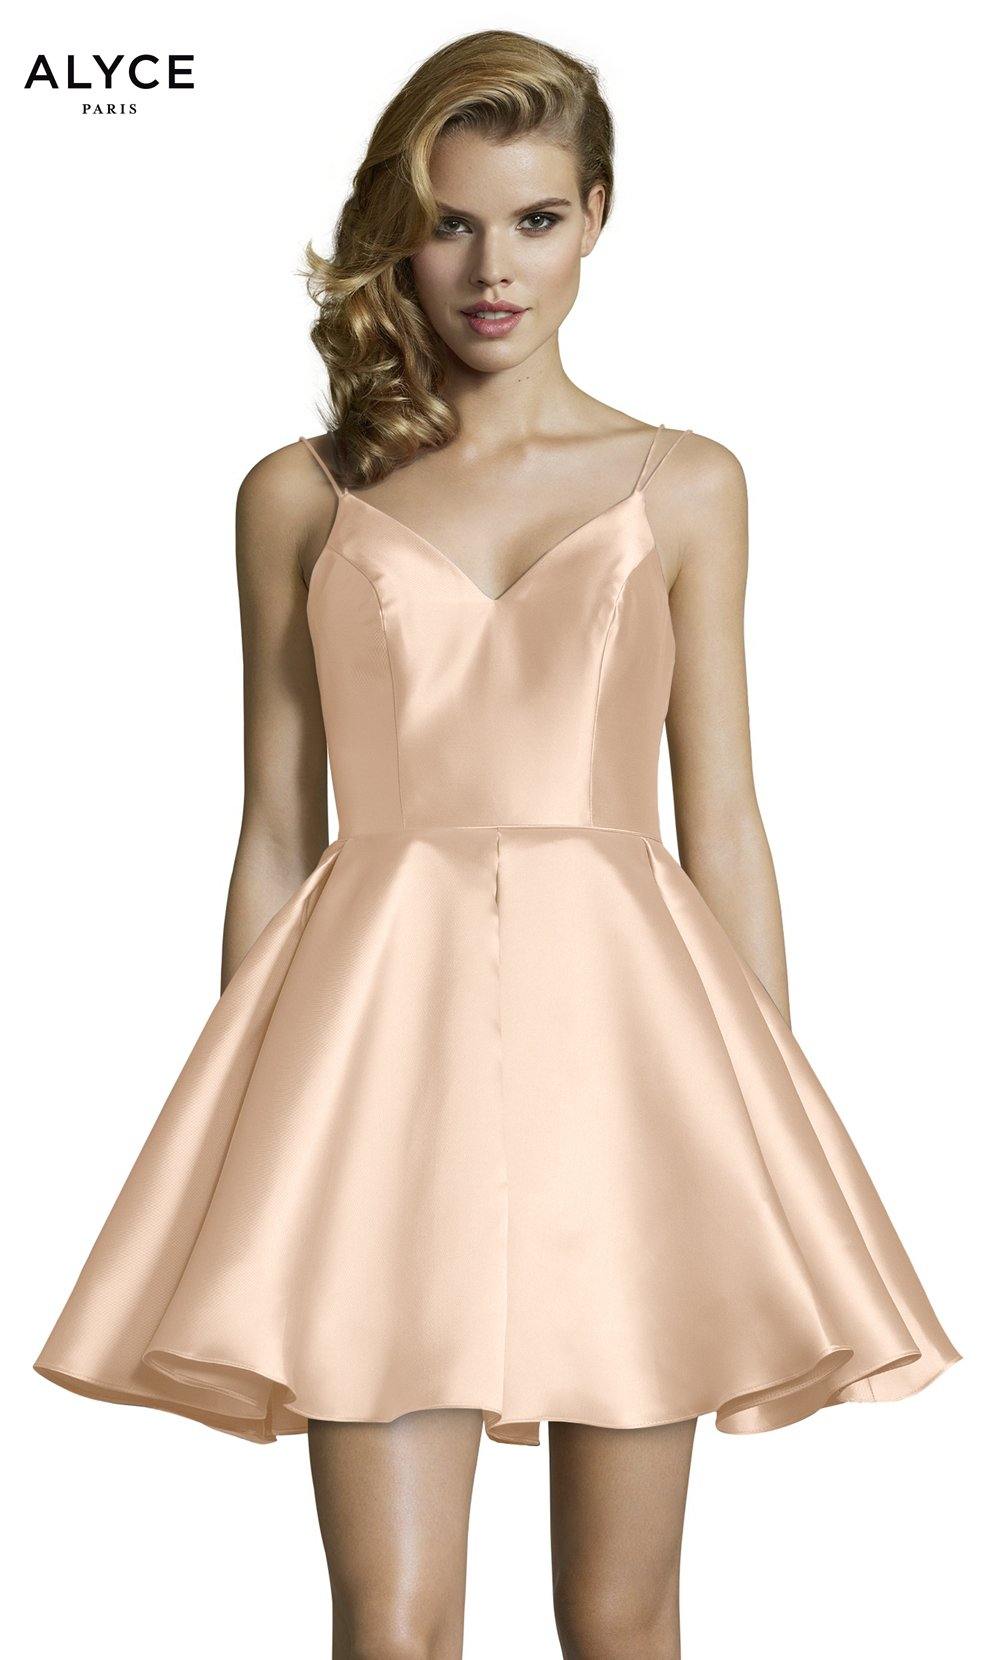 Short rose gold party dress with a v neckline, pockets, and a mikado fabrication. SWATCH_3764__ROSE-GOLD